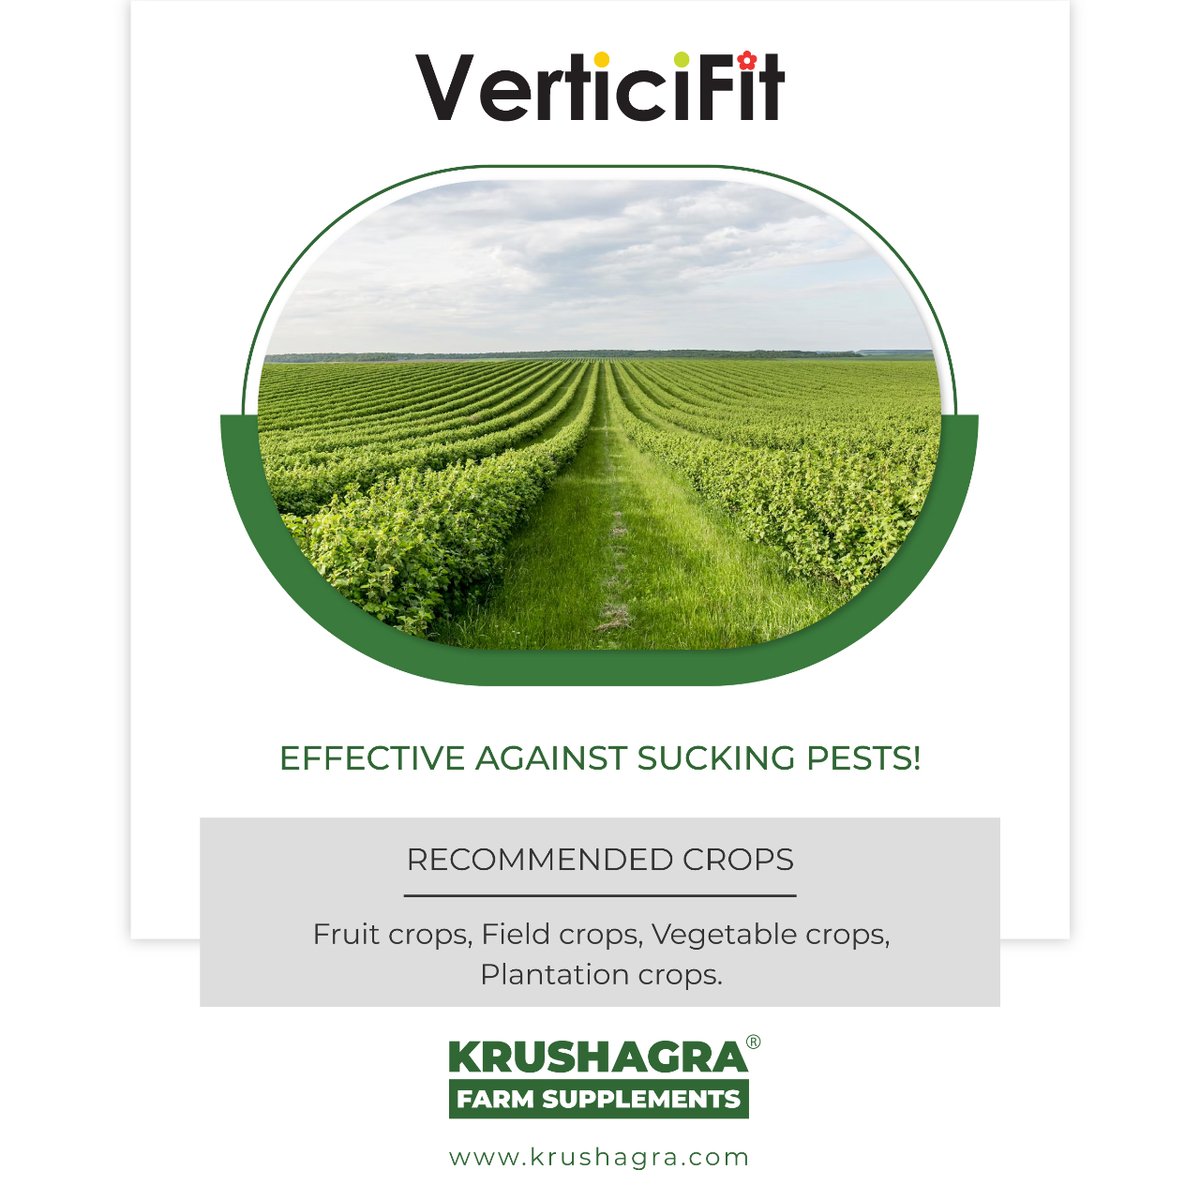 Krushagra Verticifit is effective against Whiteflies, Thrips, Aphids, Jassids and Mealy bugs. 

#Krushagra #farmbusiness #Biofertilizers #Biopesticide